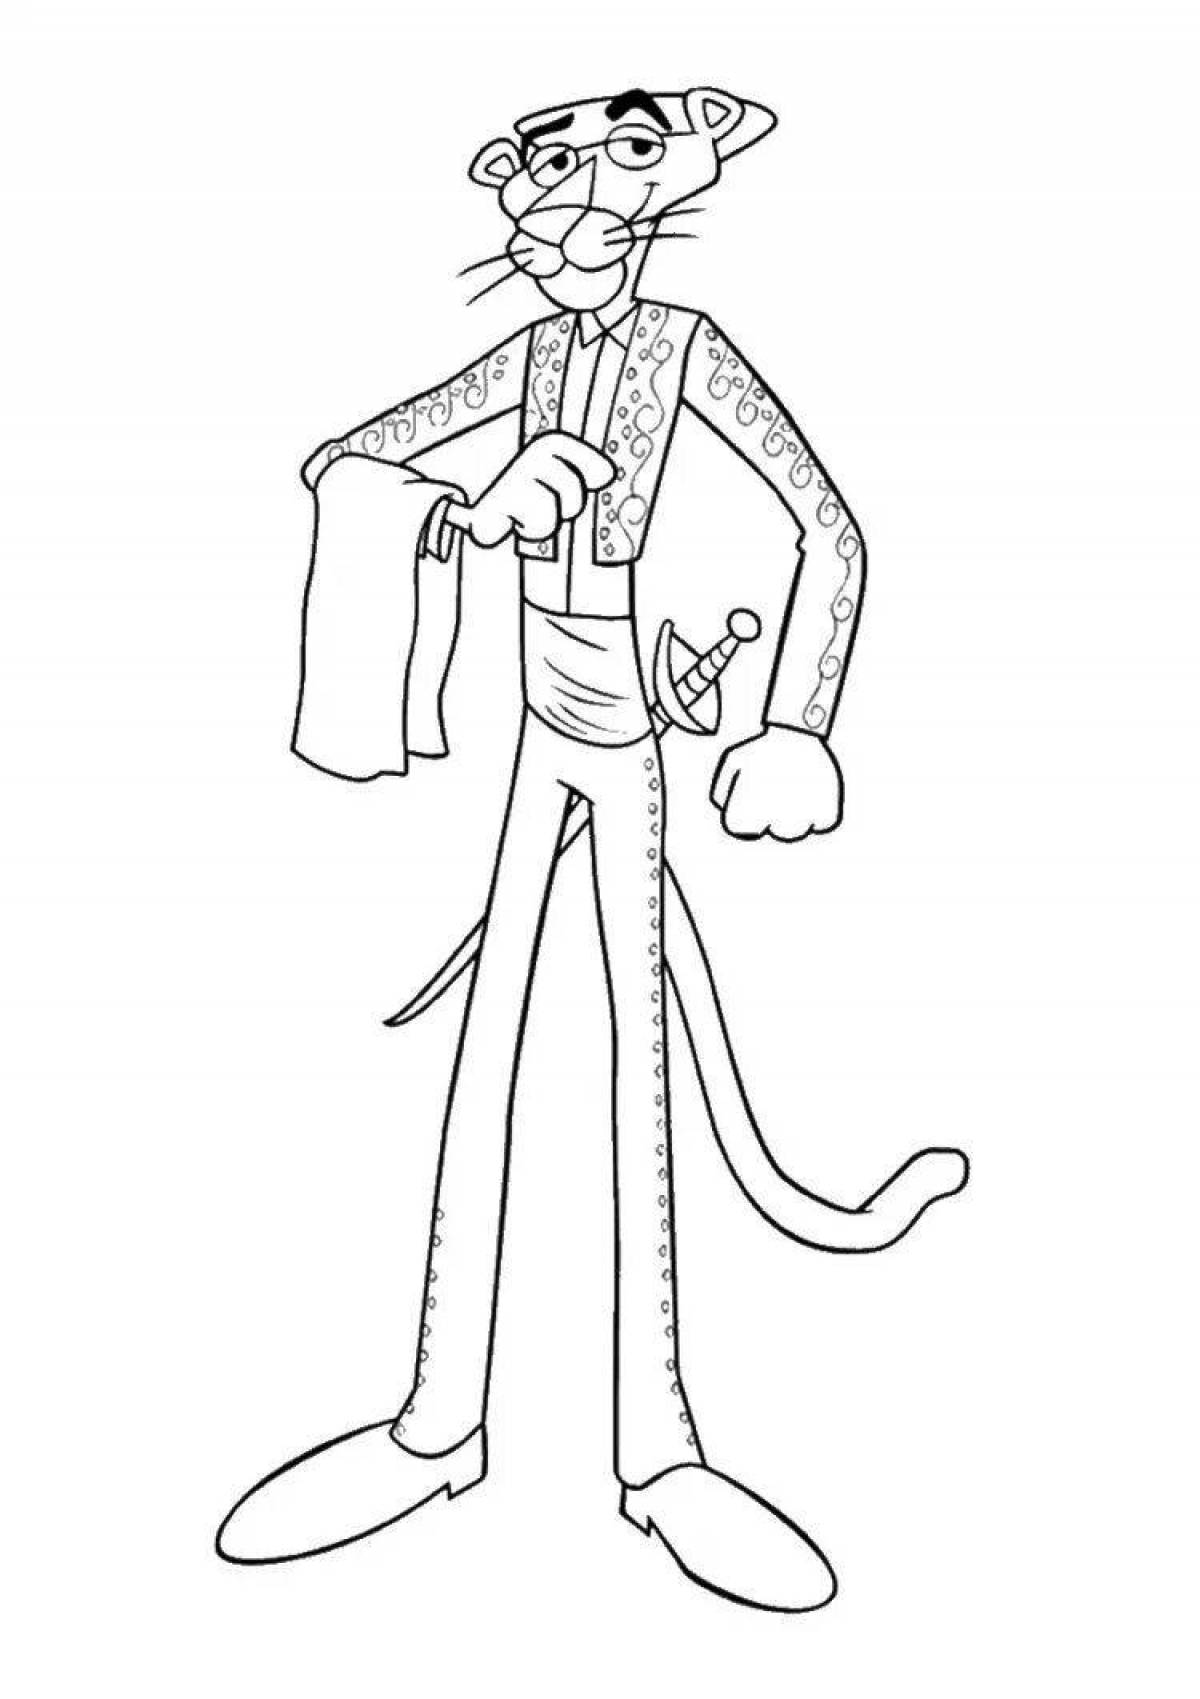 Naughty pink panther coloring page